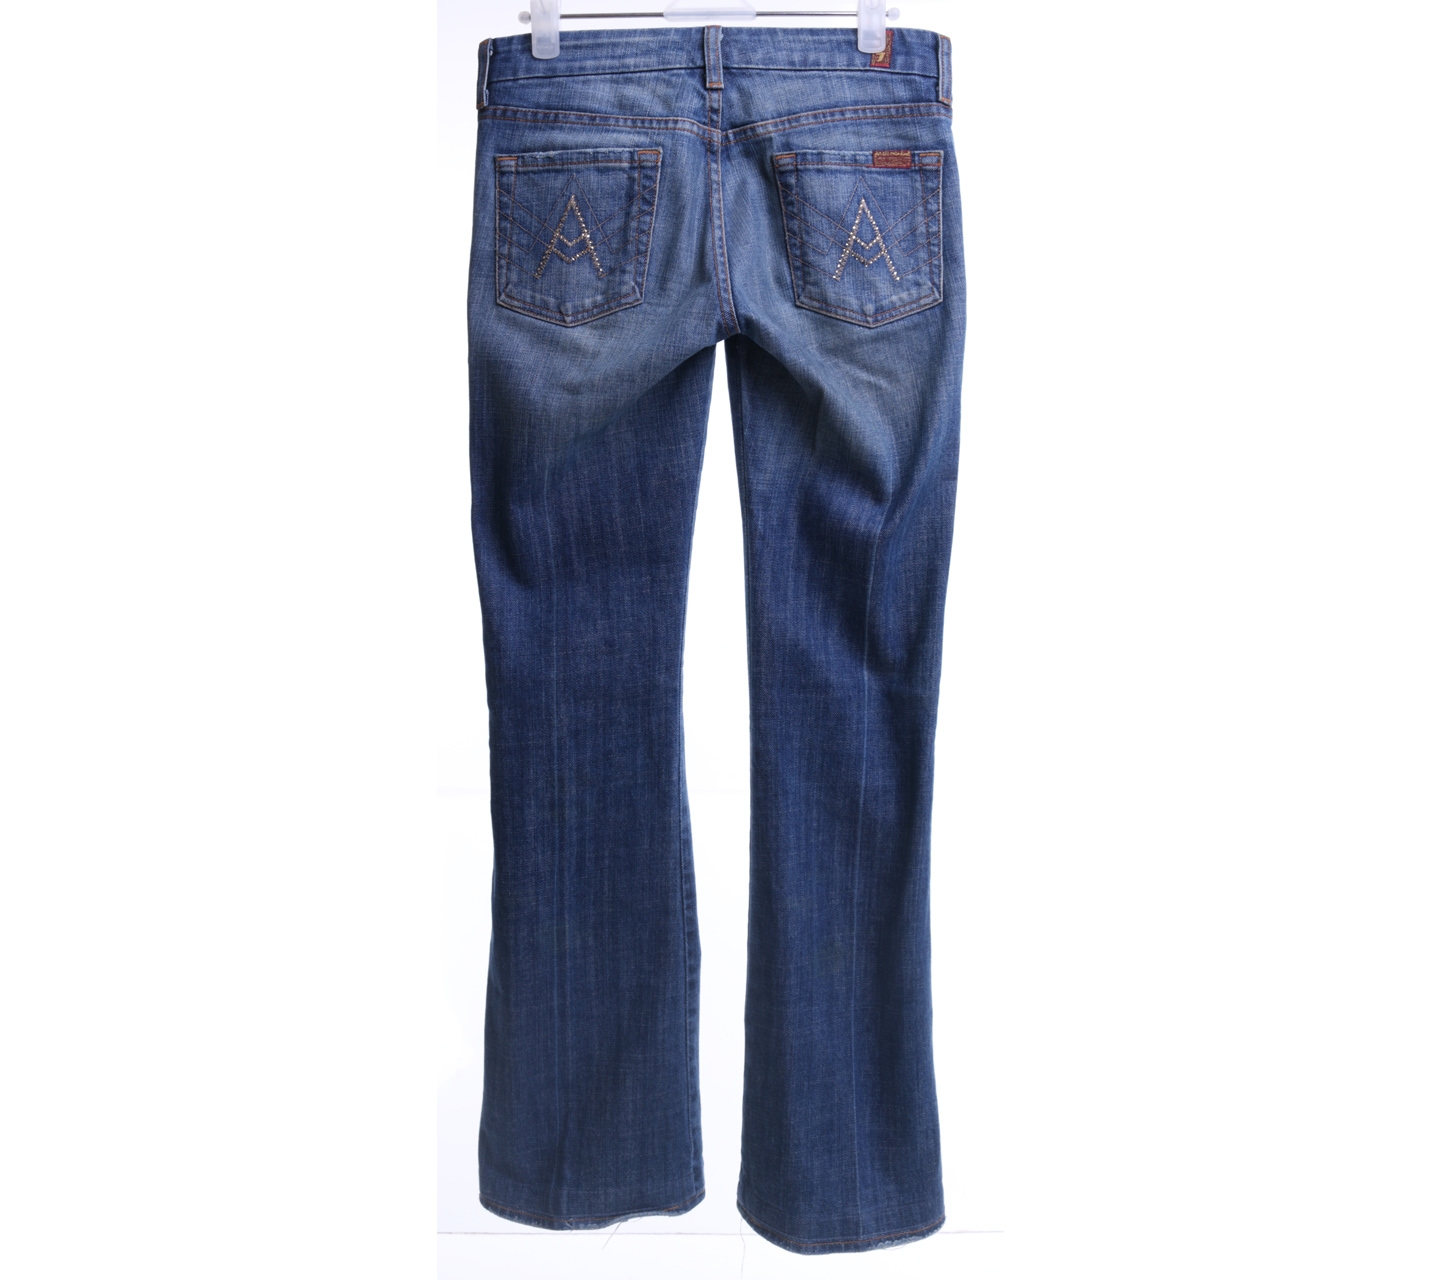 7 For All Mankind Dark Blue Long Pants